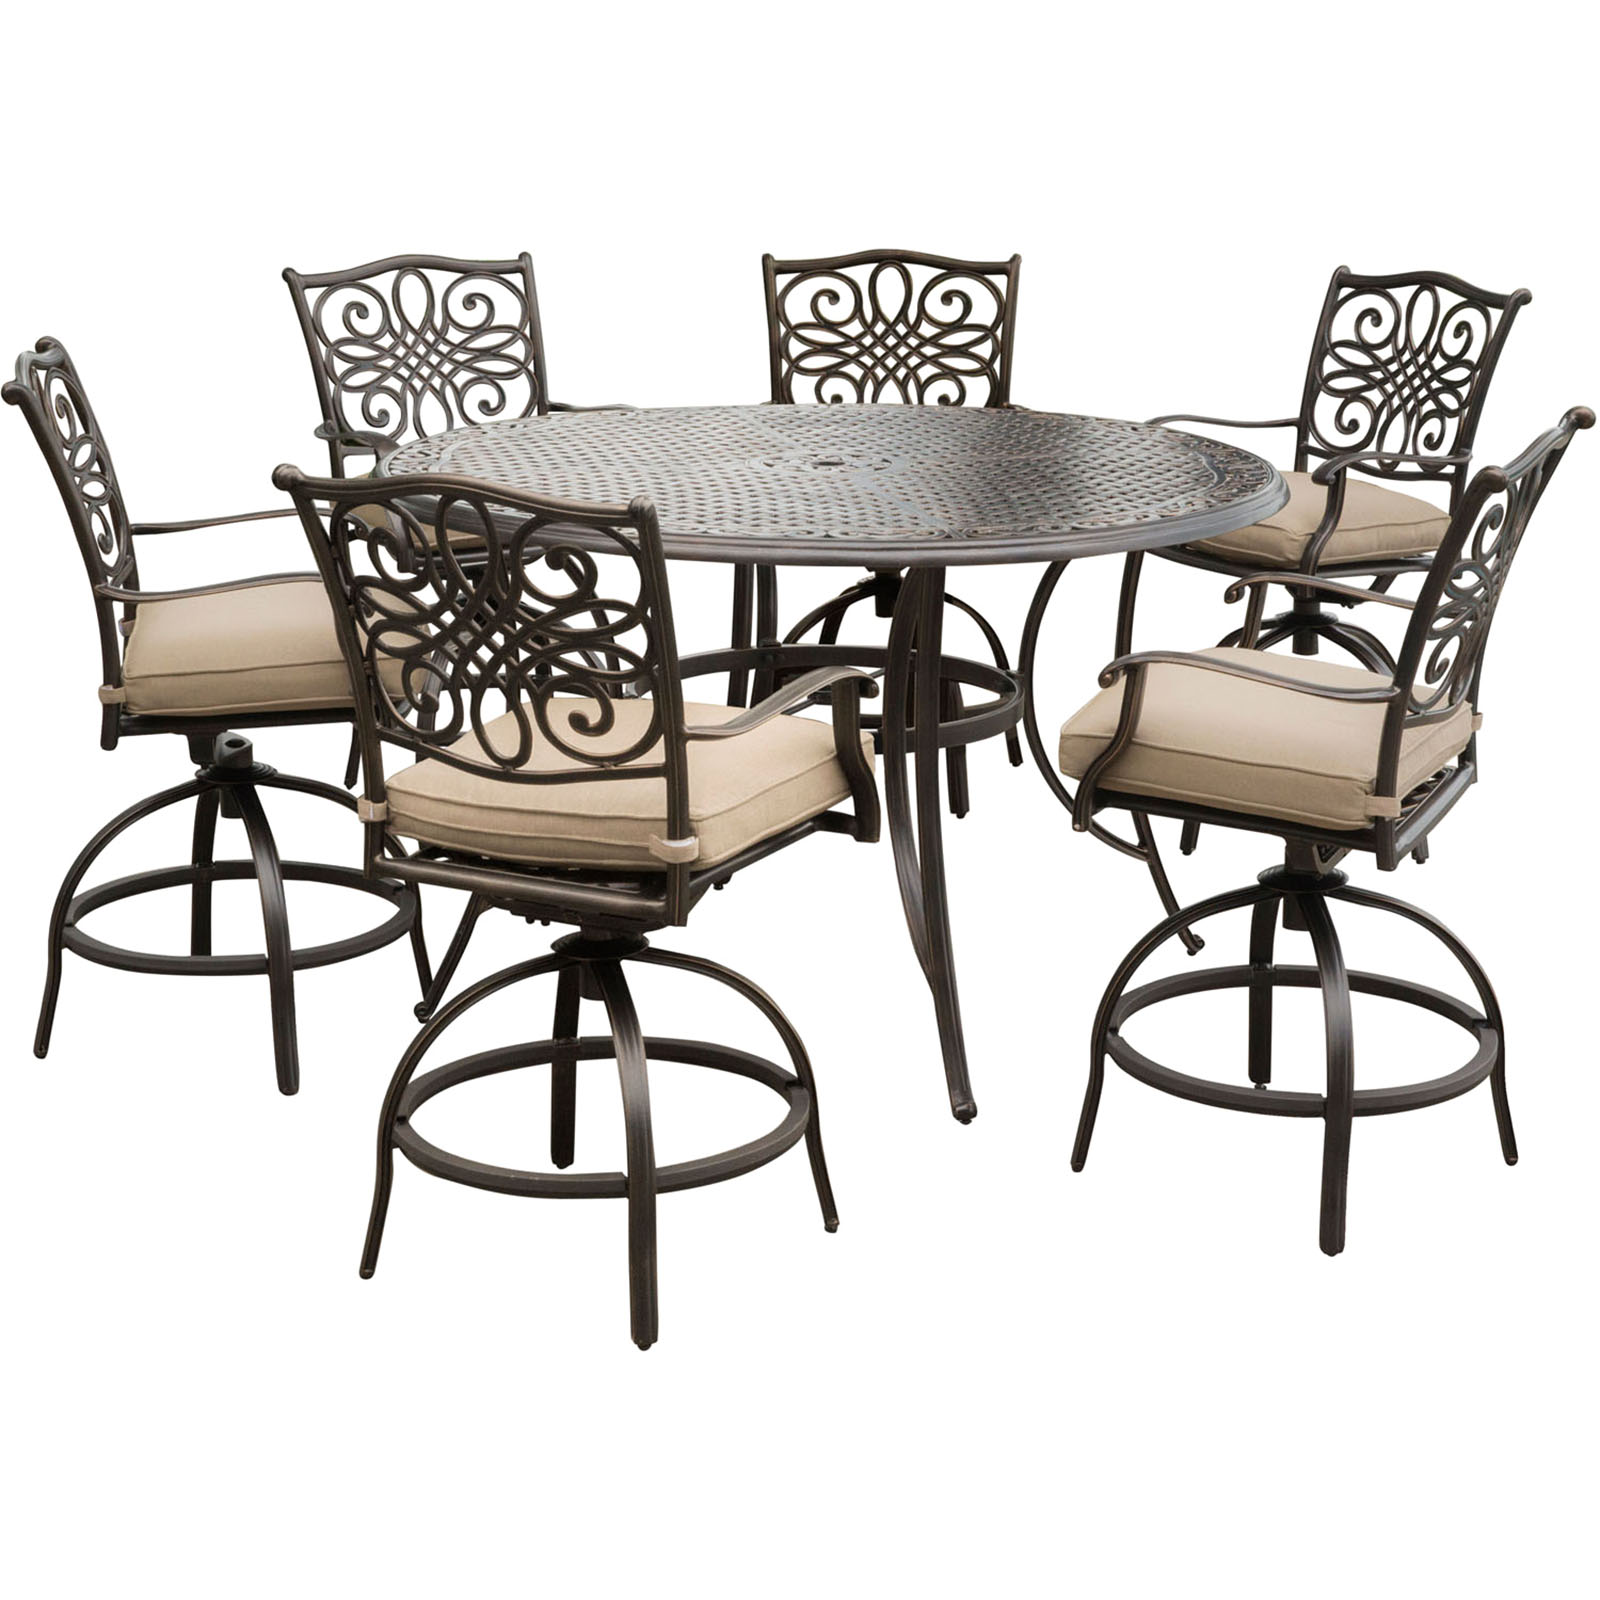 Hanover Traditions 7pc. High-Dining Bar Set with Cushions - Tan